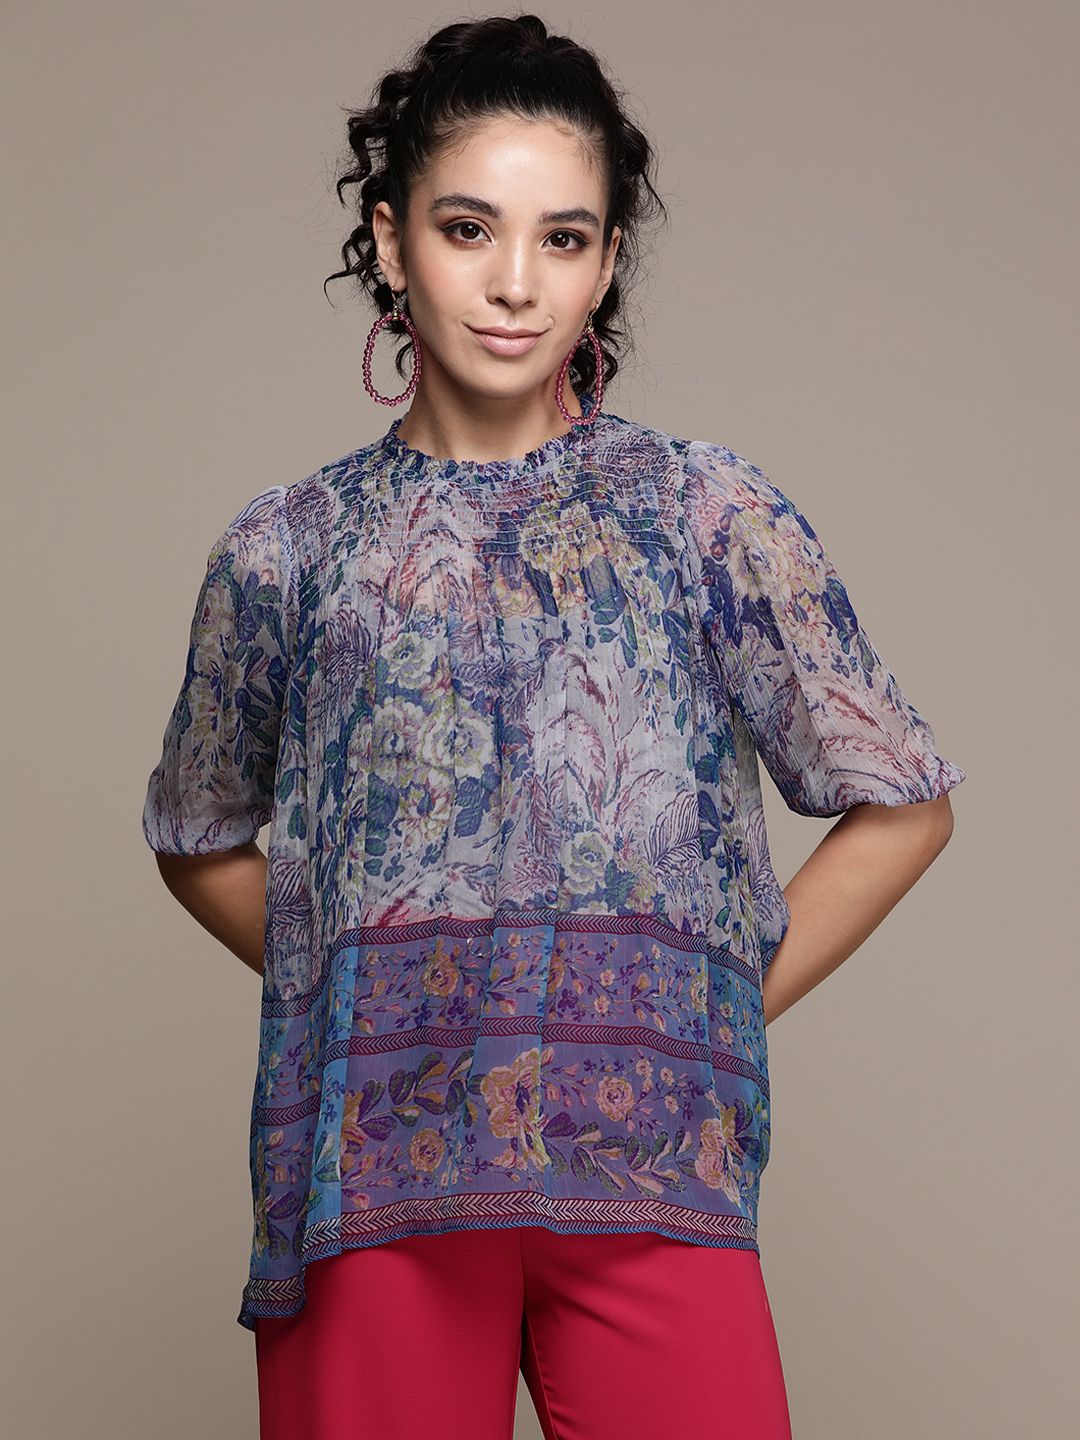 Label Ritu Kumar Blue Floral Printed Chiffon Top with Camisole Price in India